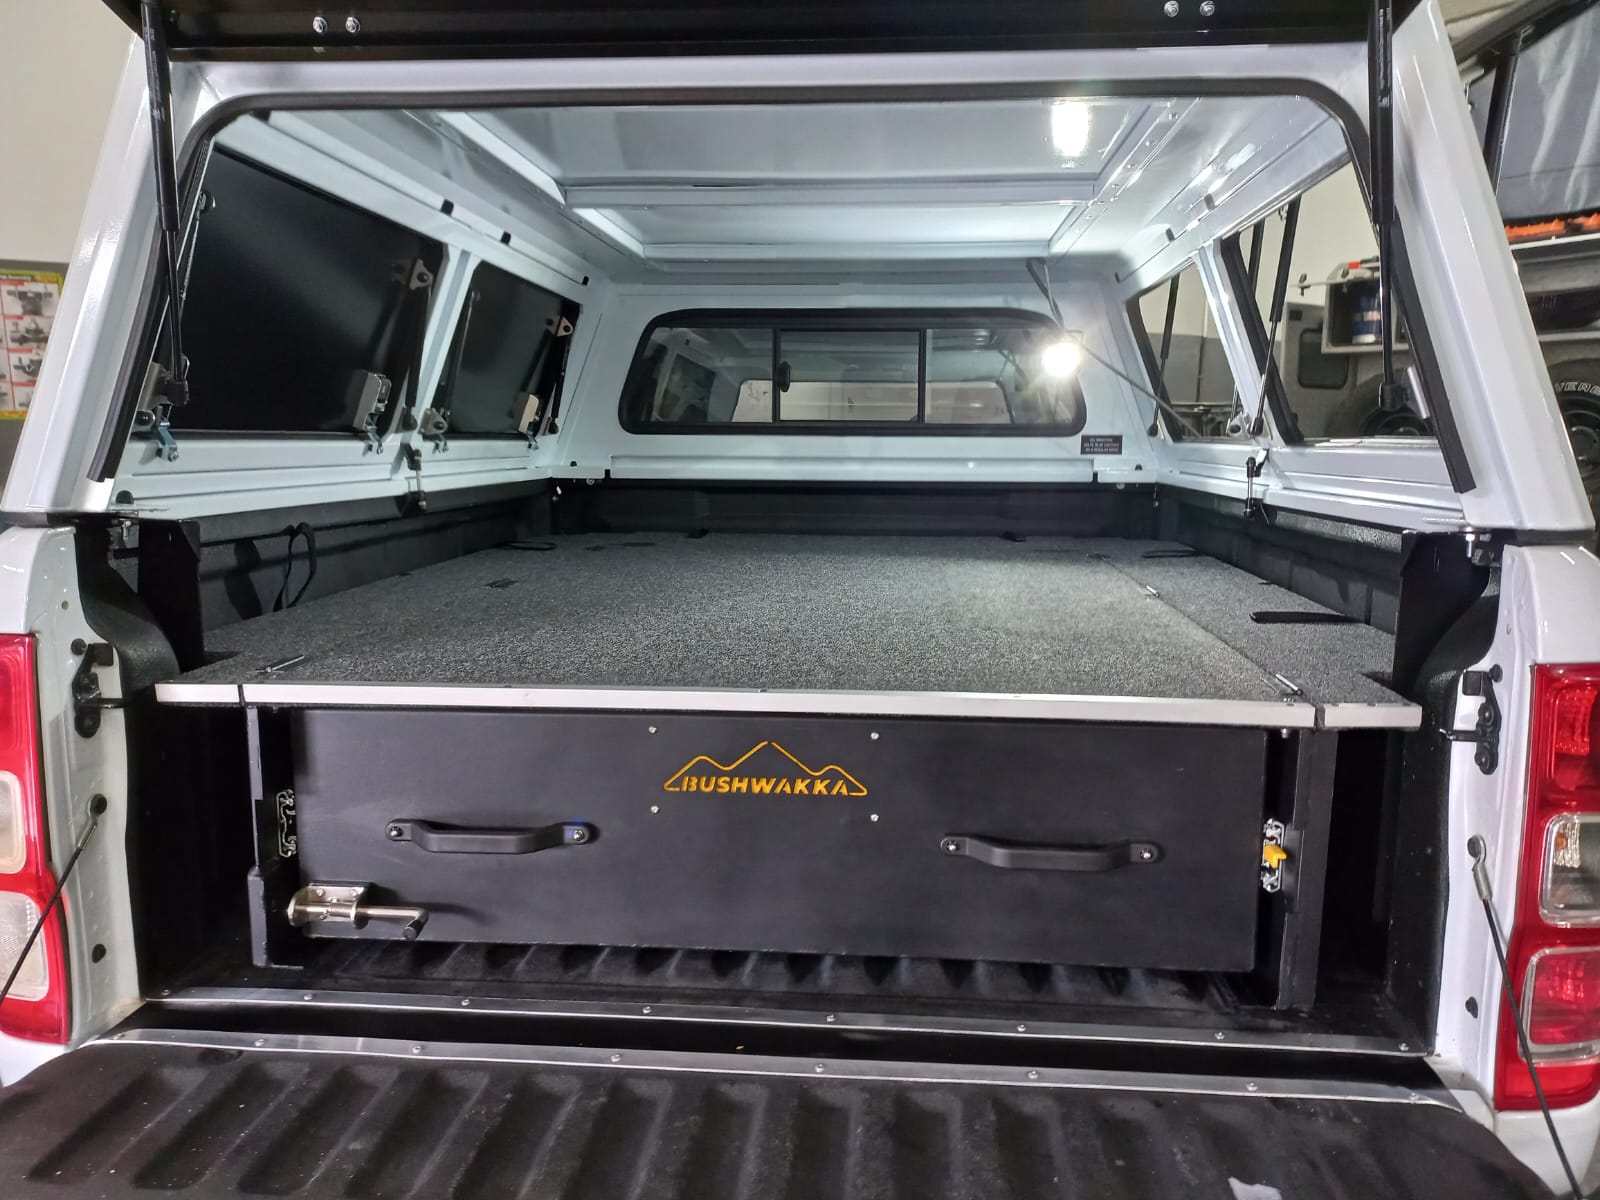 kamelback-4x4-fitment-centre-worcester-drawer systems